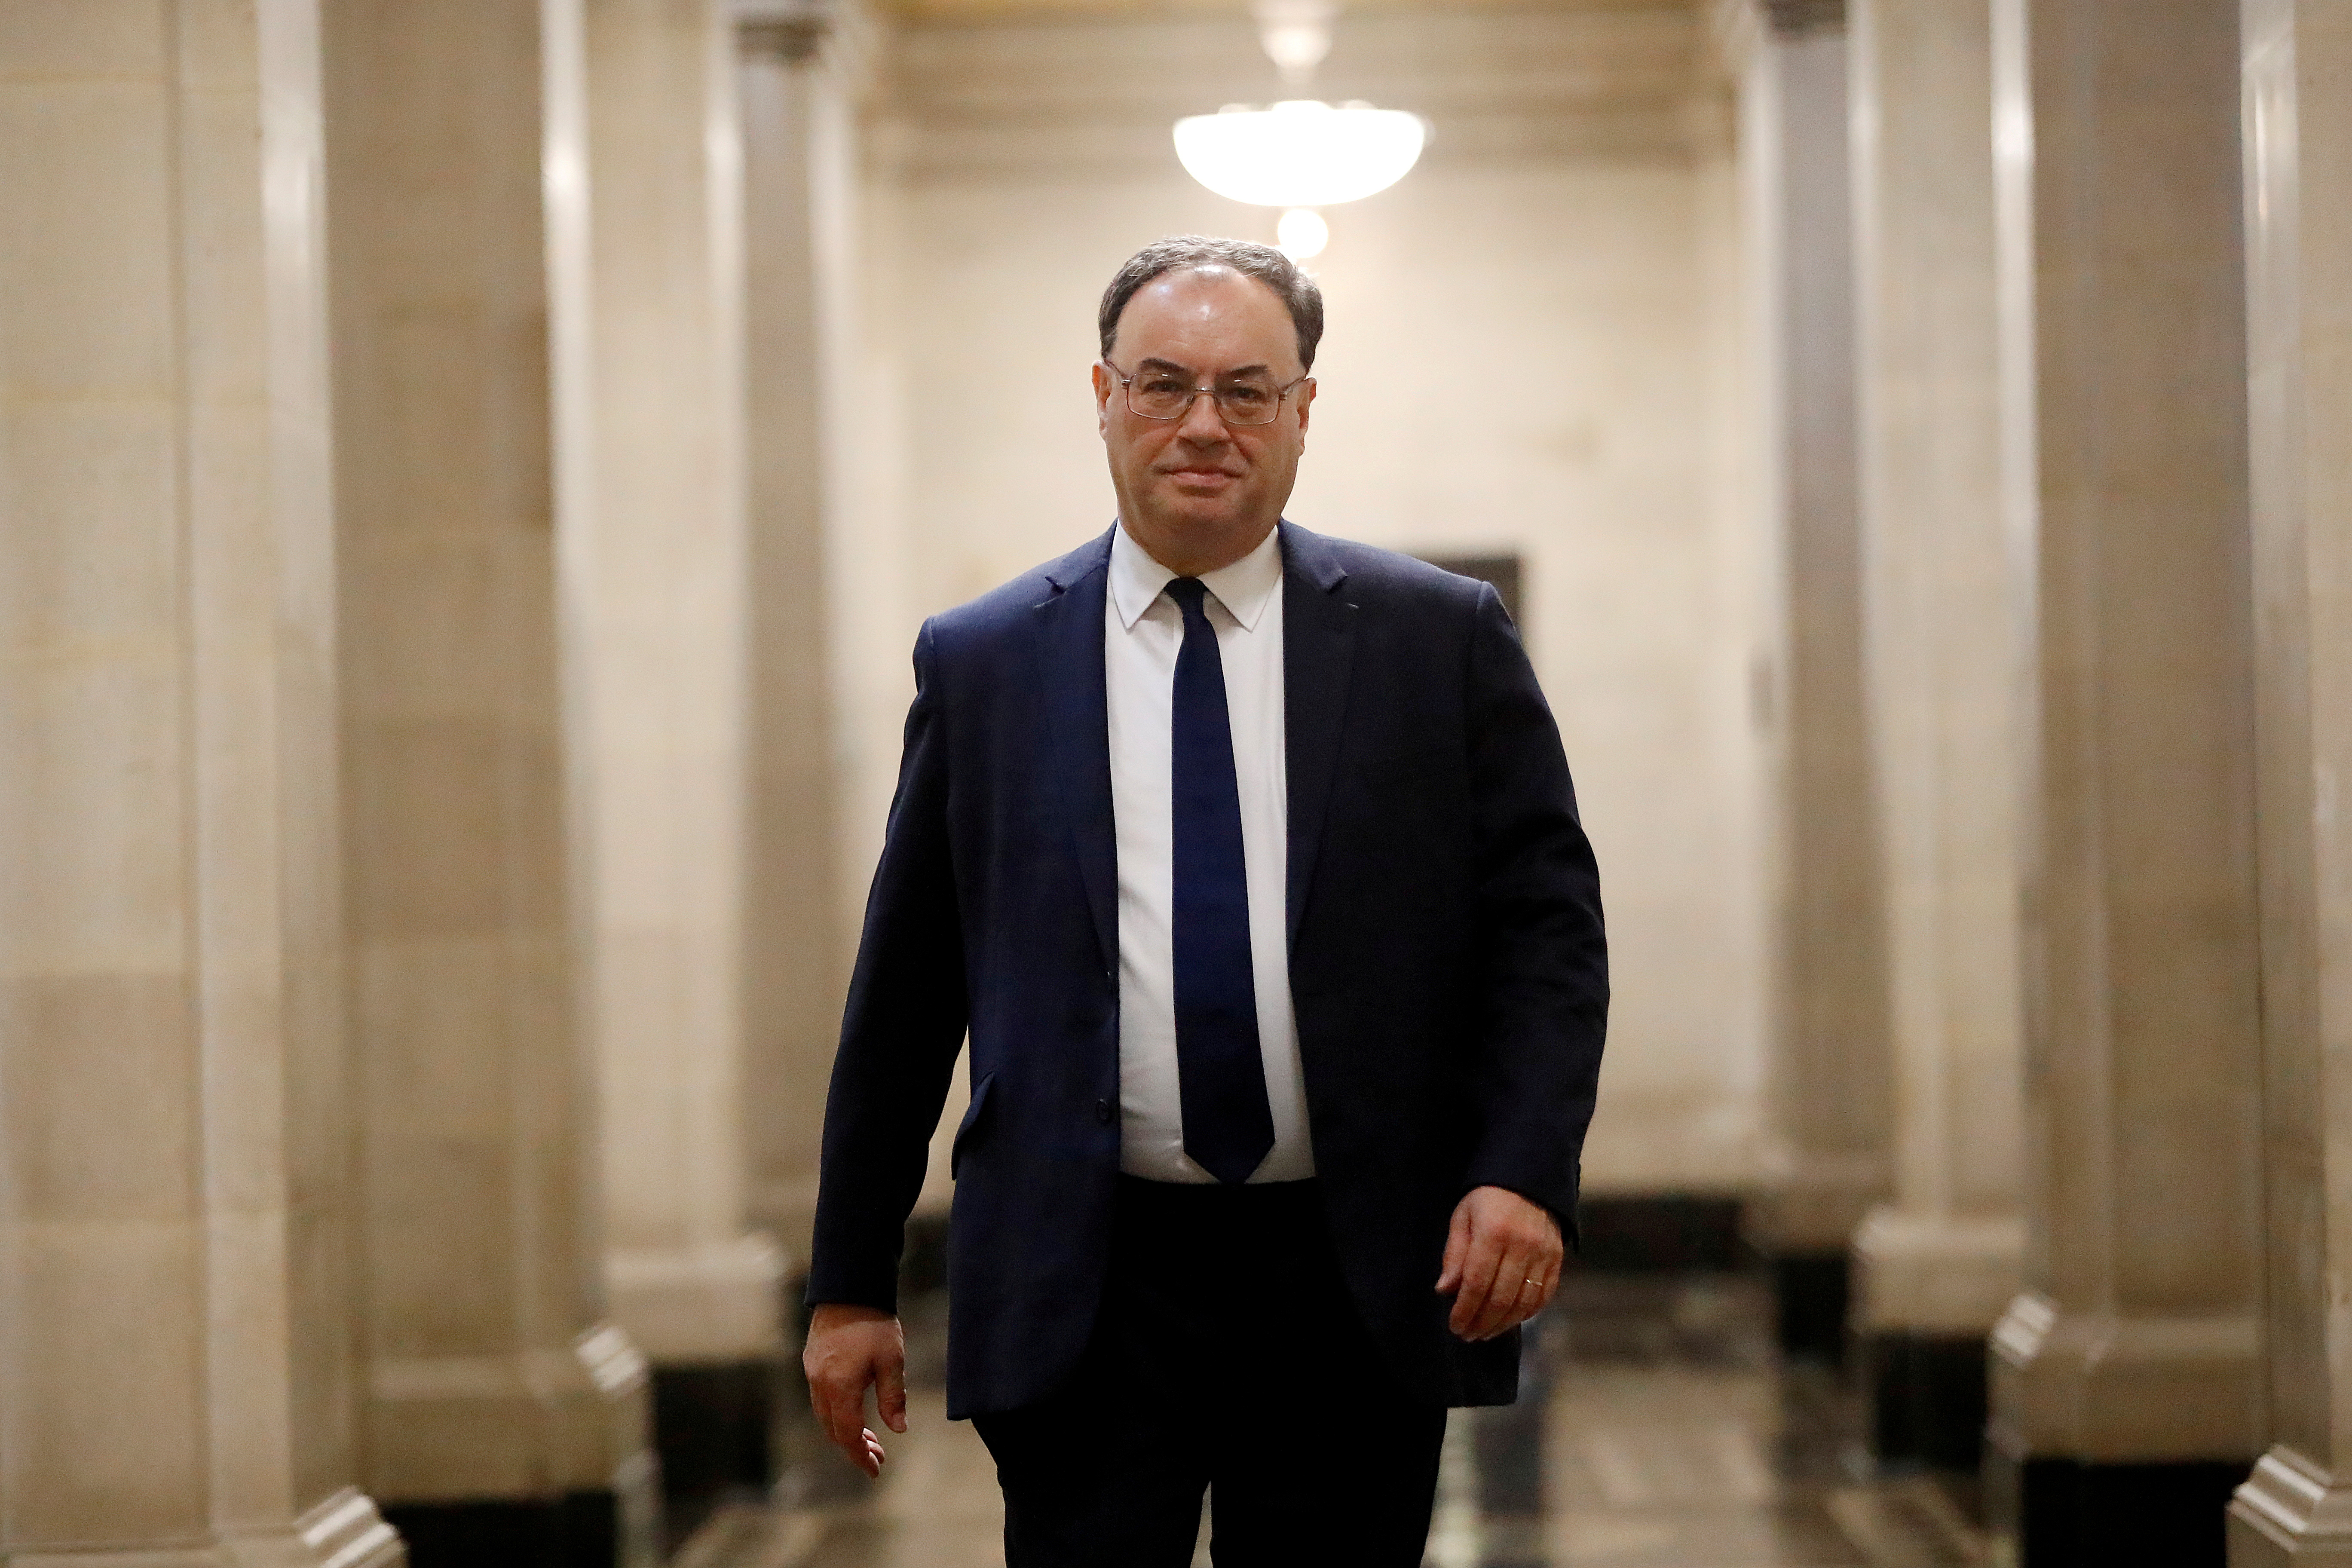 Bank of England Governor Andrew Bailey poses for a photograph on the first day of his new role at the Central Bank in London